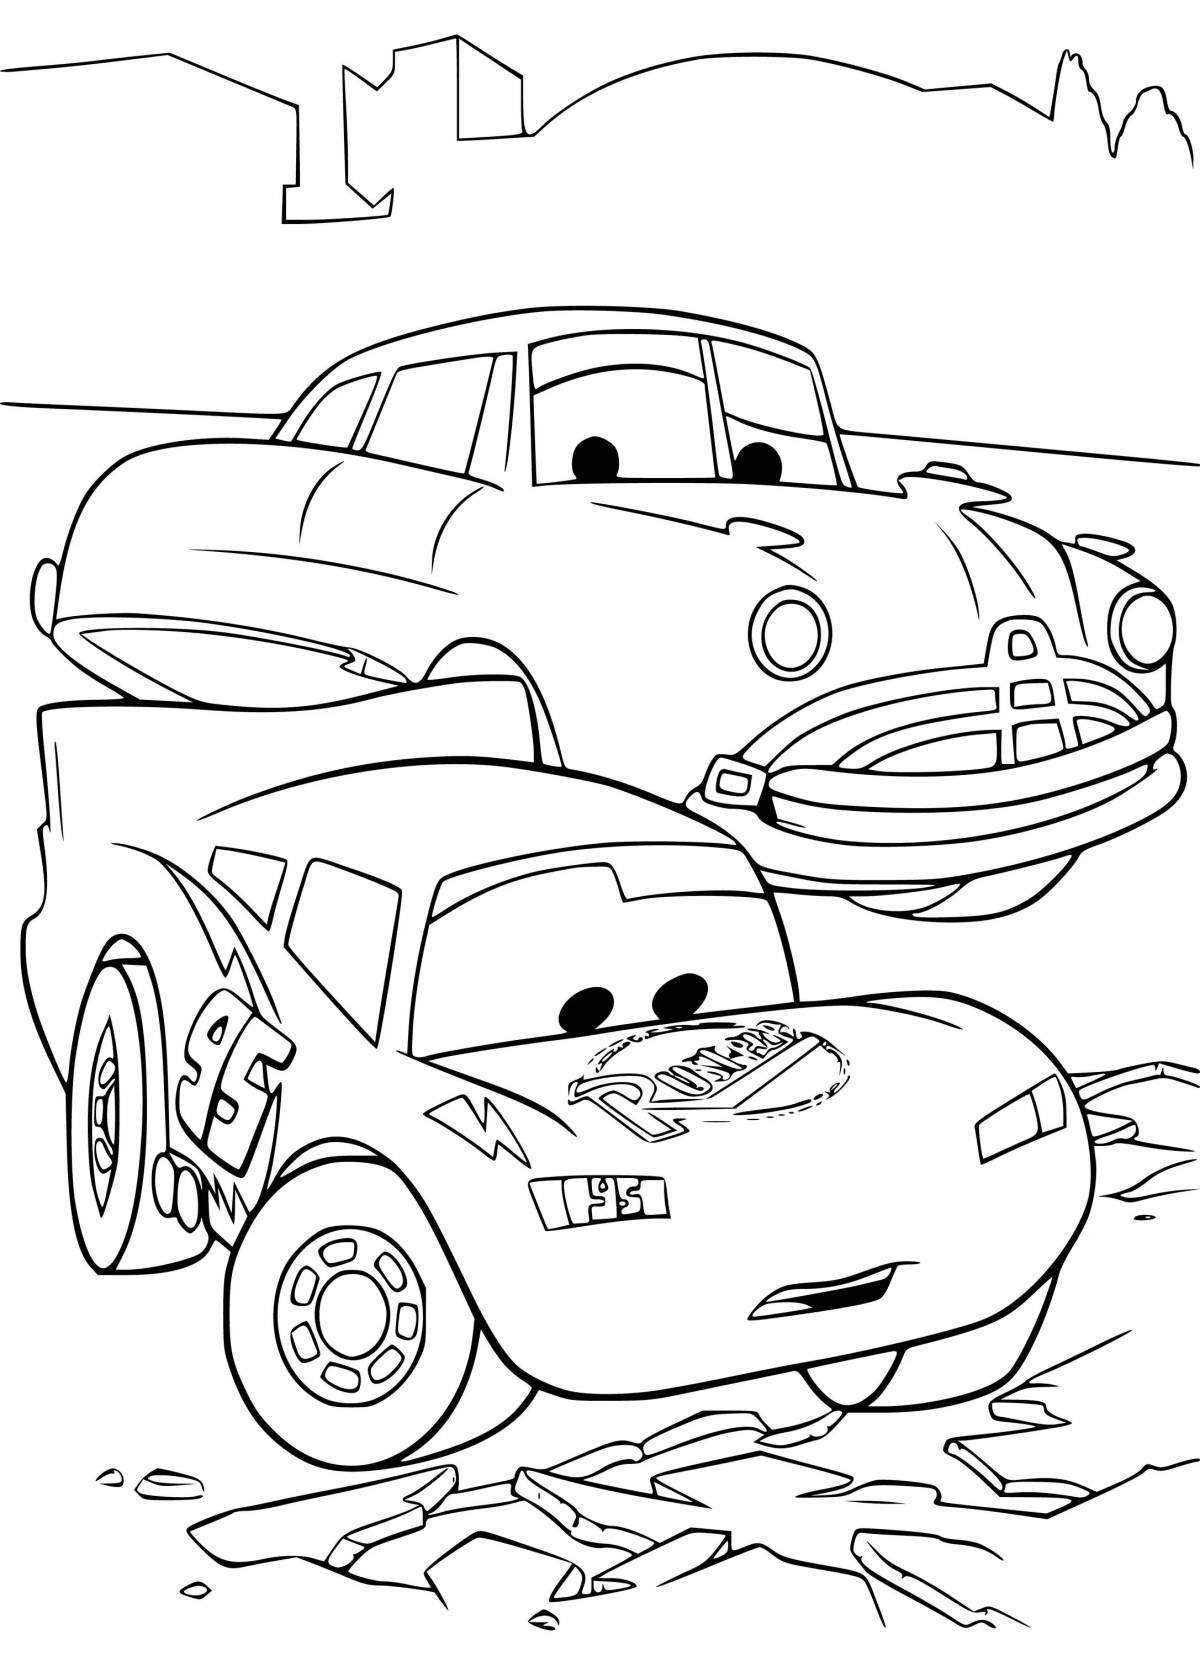 Coloring book wonderful cars for boys